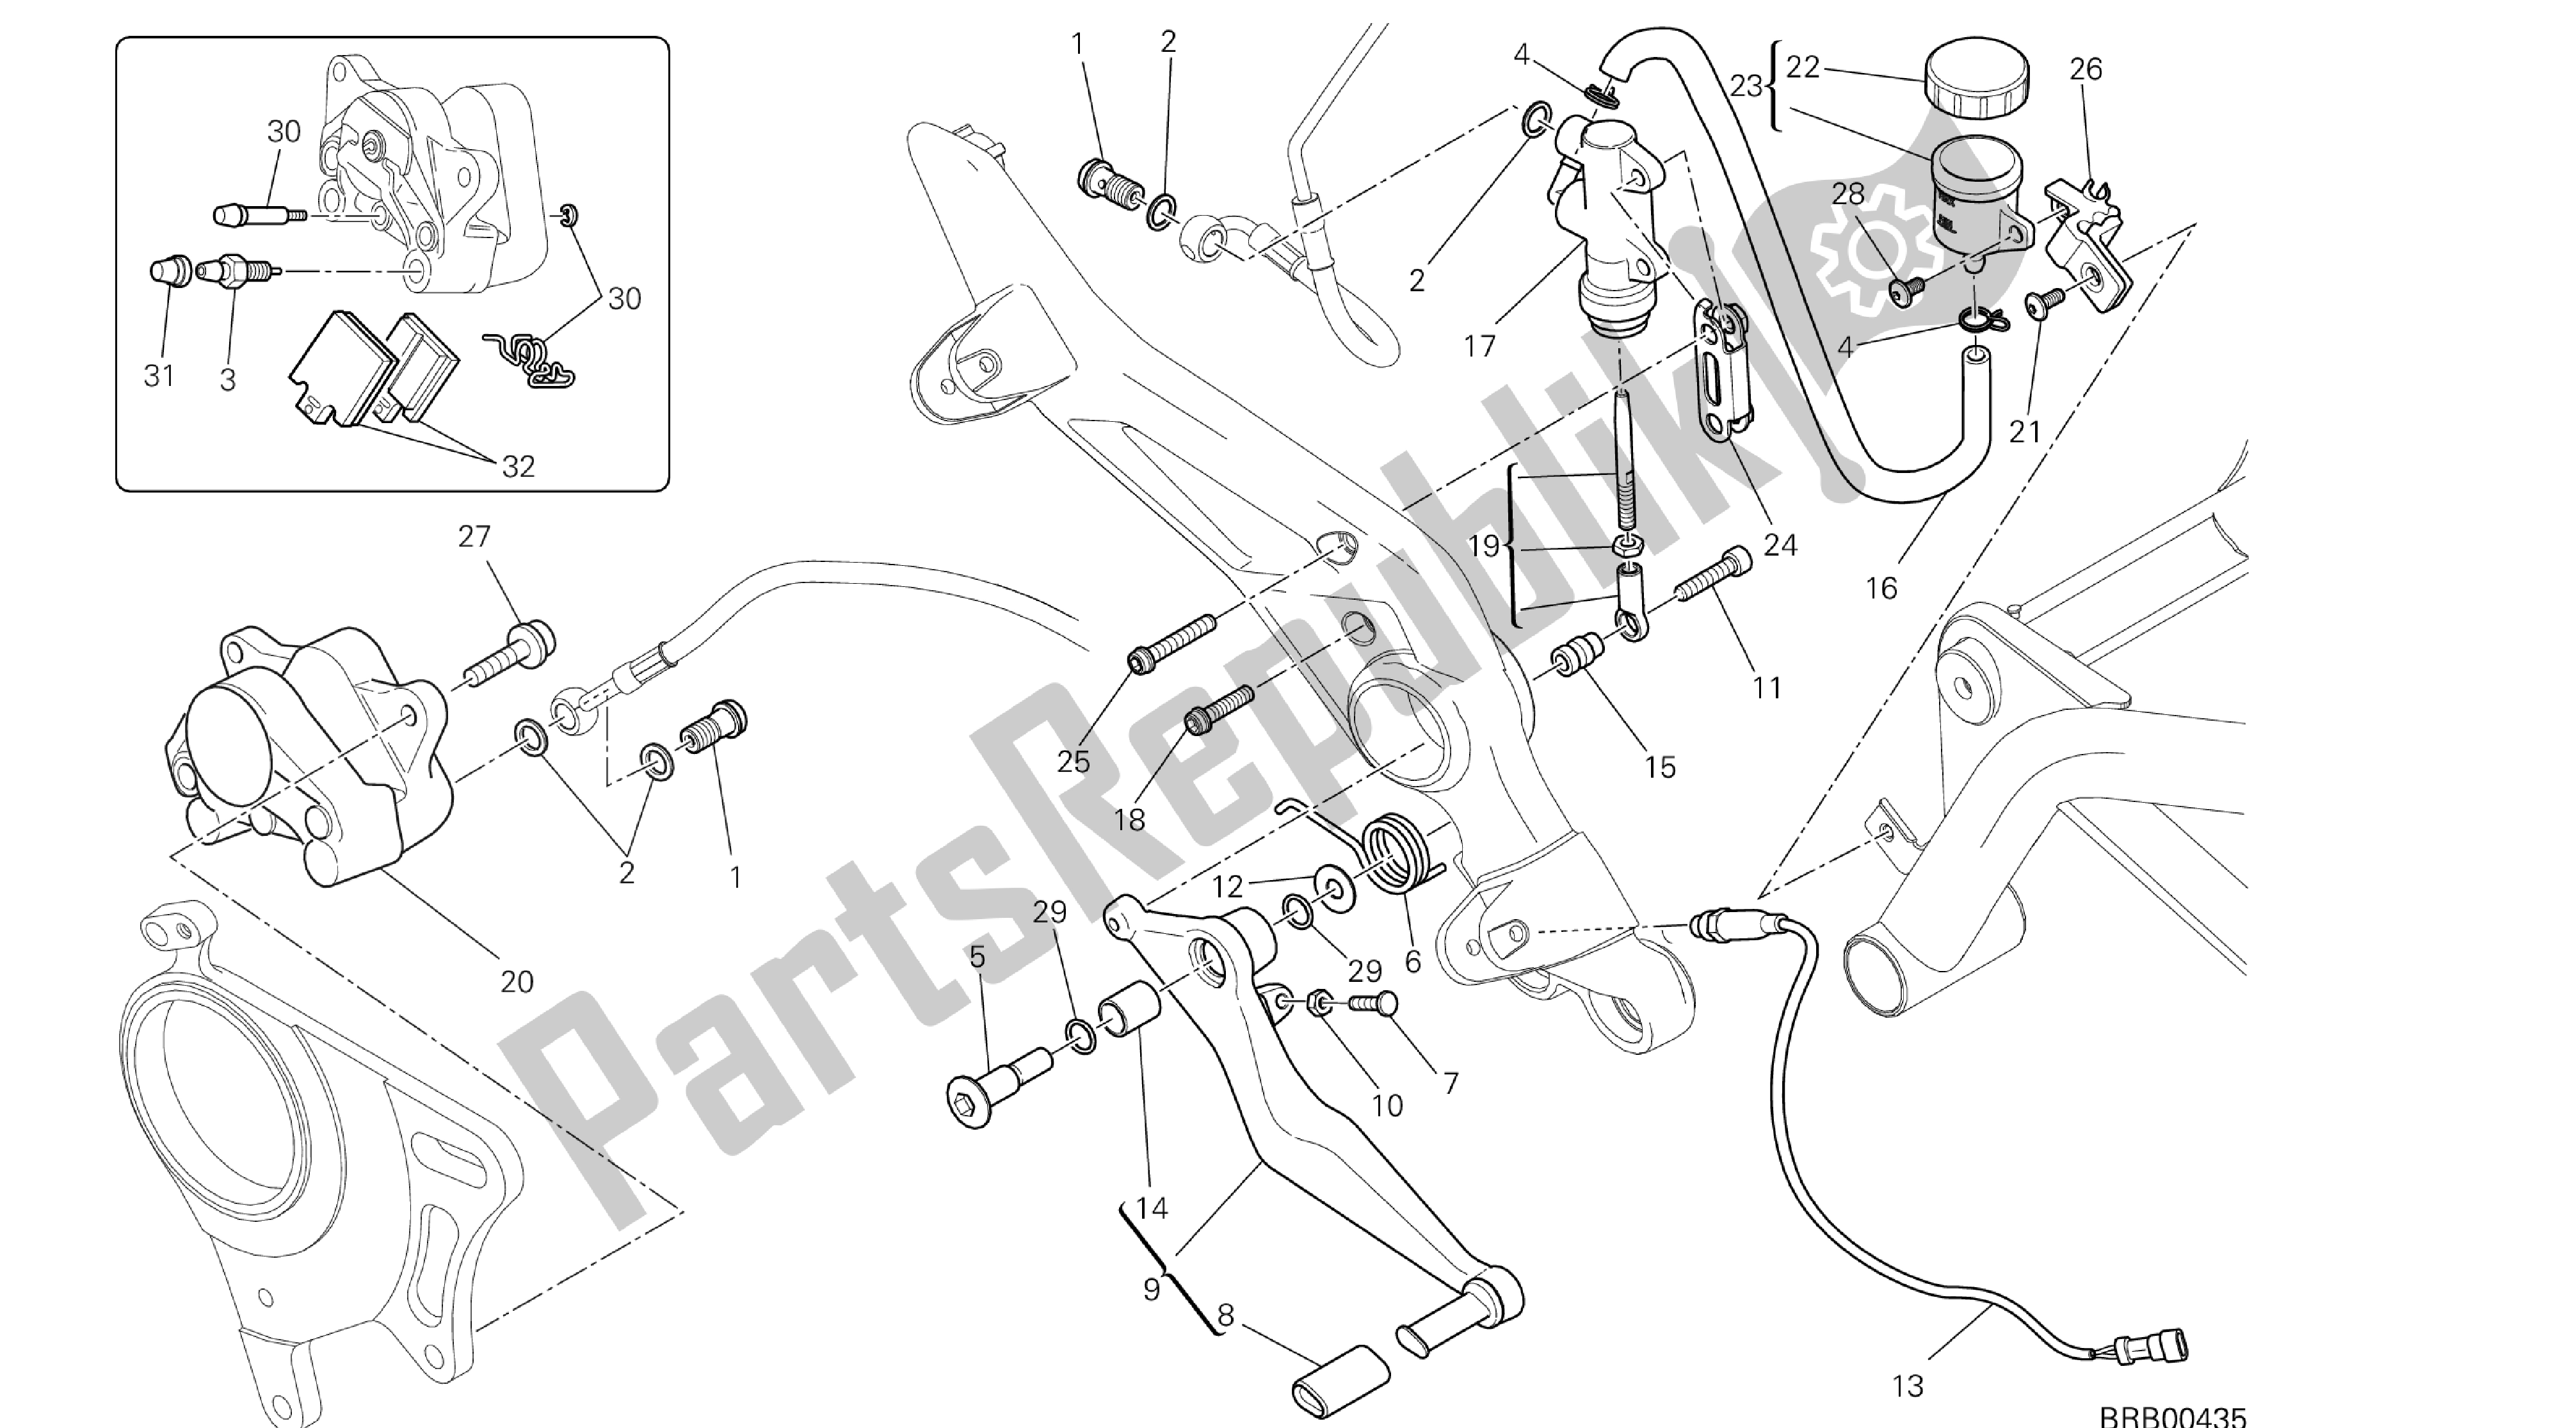 All parts for the Drawing 025 - Rear Brake System [x St:cal,c Dn,eur] Group Fr Ame of the Ducati Hypermotard SP 821 2013